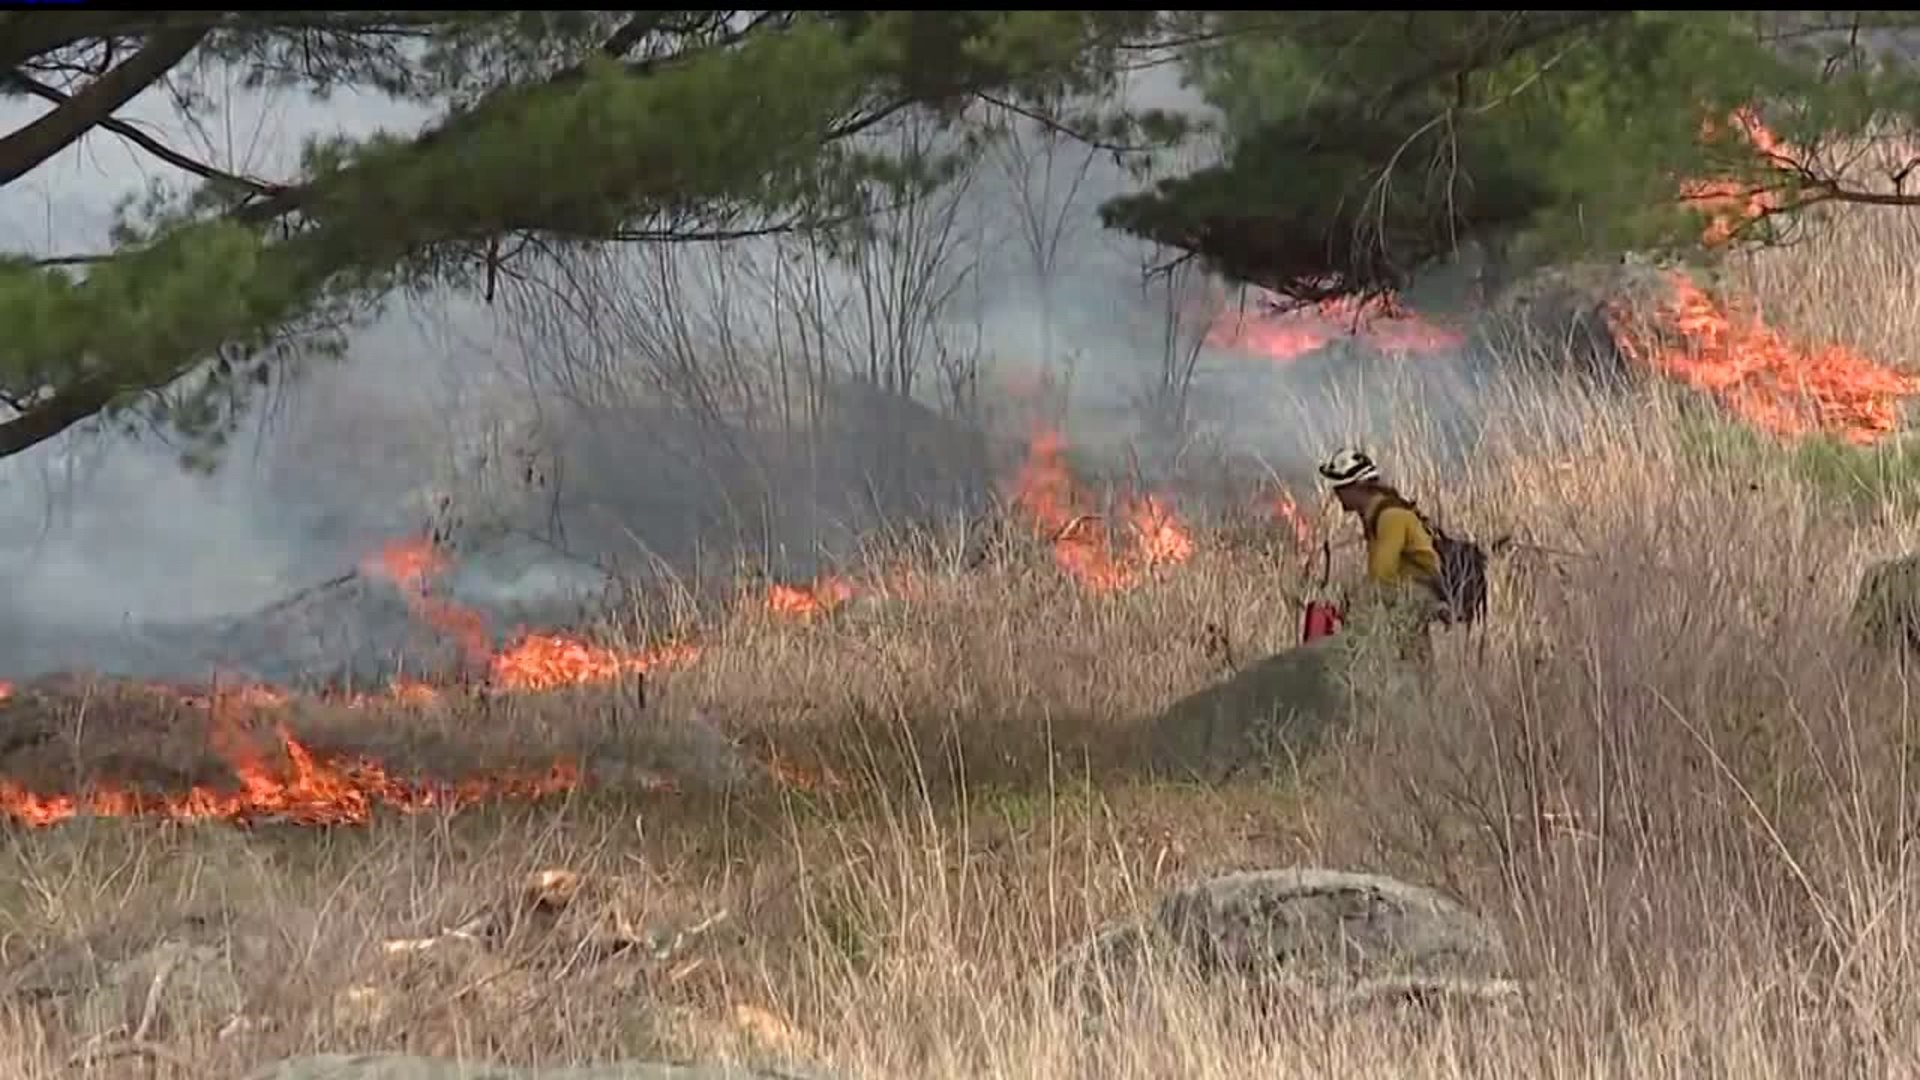 Controlled burn at Little Round Top in Gettysburg